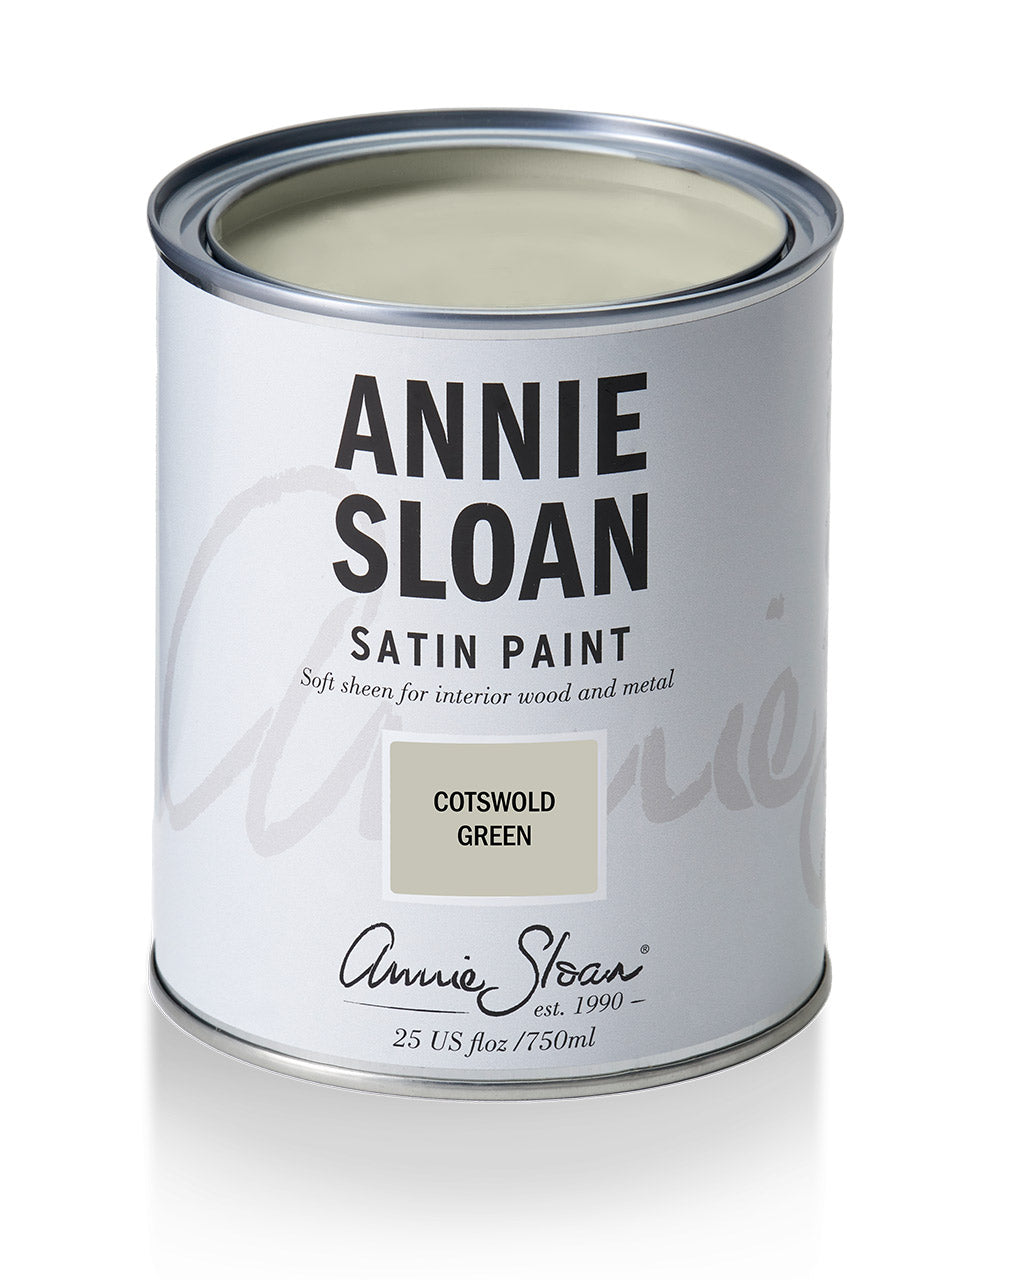 Satin Paint - Cotswold Green